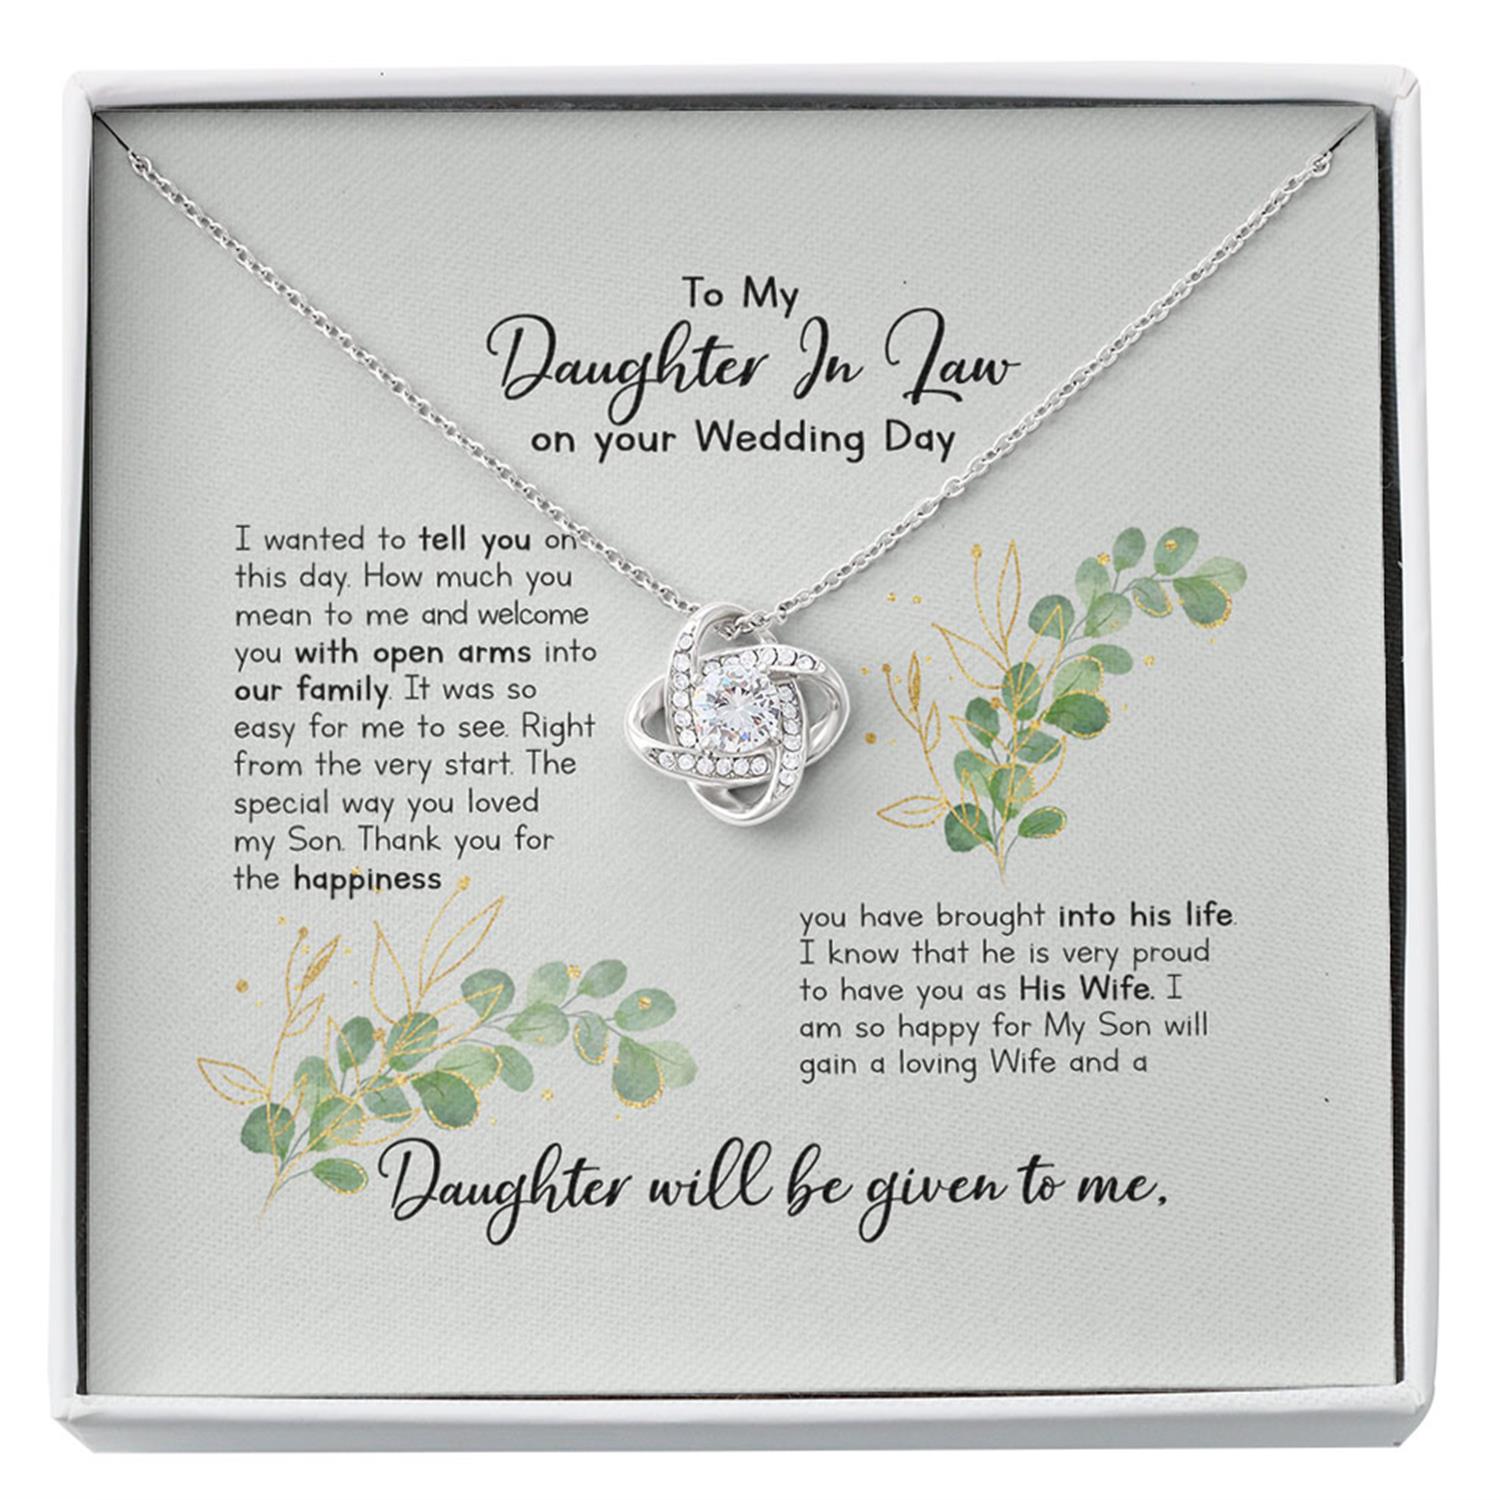 Daughter-In-Law Necklace, Gift For Bride From Mother Of Groom, Bridal Shower Gifts From Mother Of The Groom, Daughter In Law Gift On Wedding Day Custom Necklace